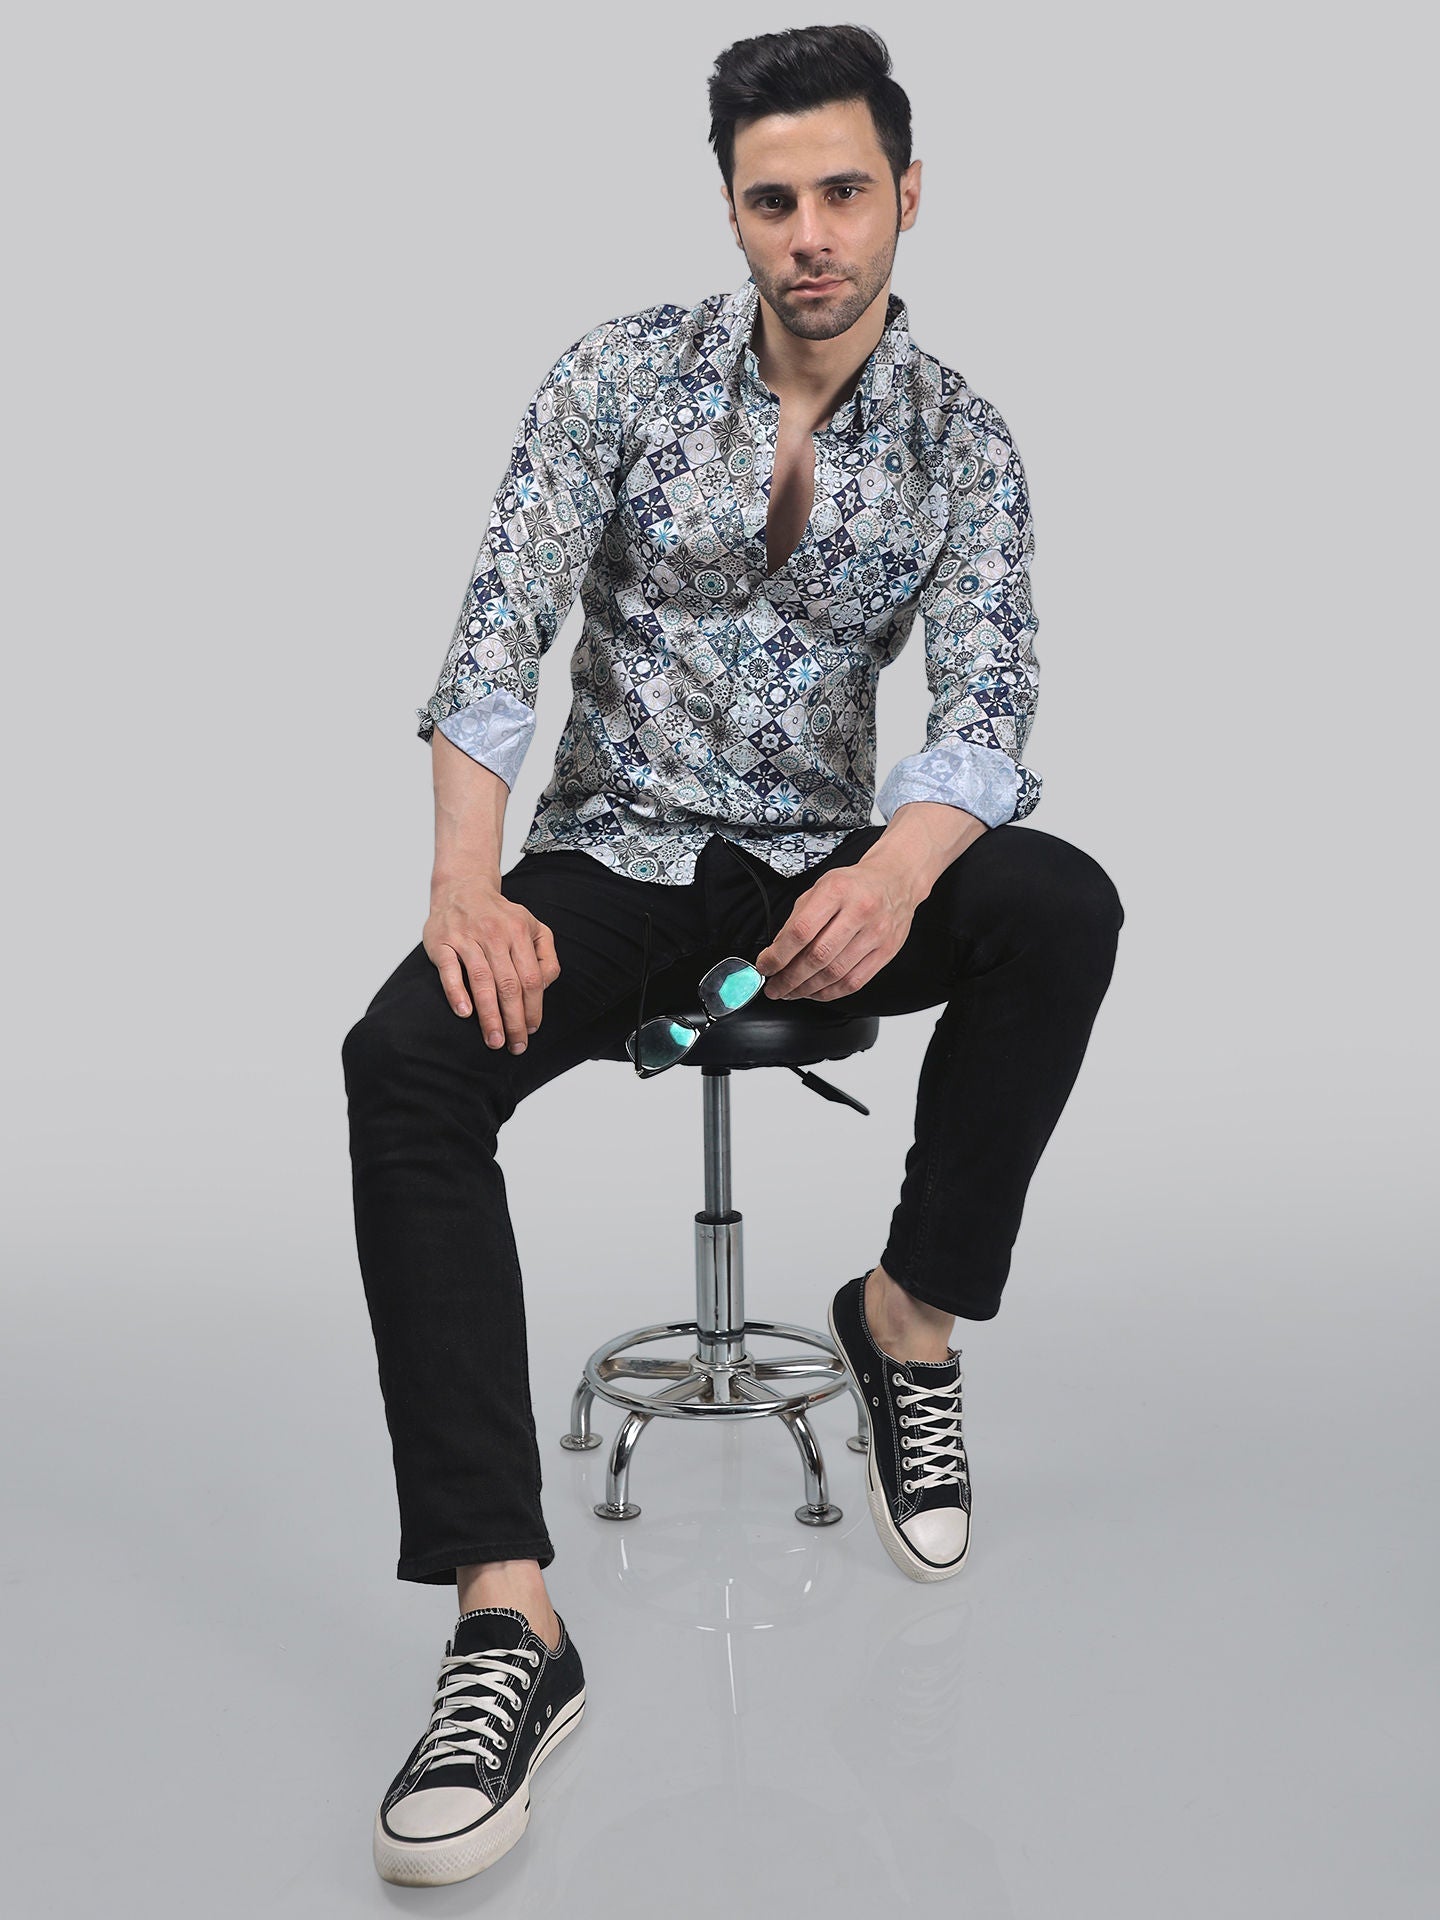 TryBuy Men's Printed Full Sleeve Casual Linen Shirt - Add Some Pop to Your Outfit! - TryBuy® USA🇺🇸